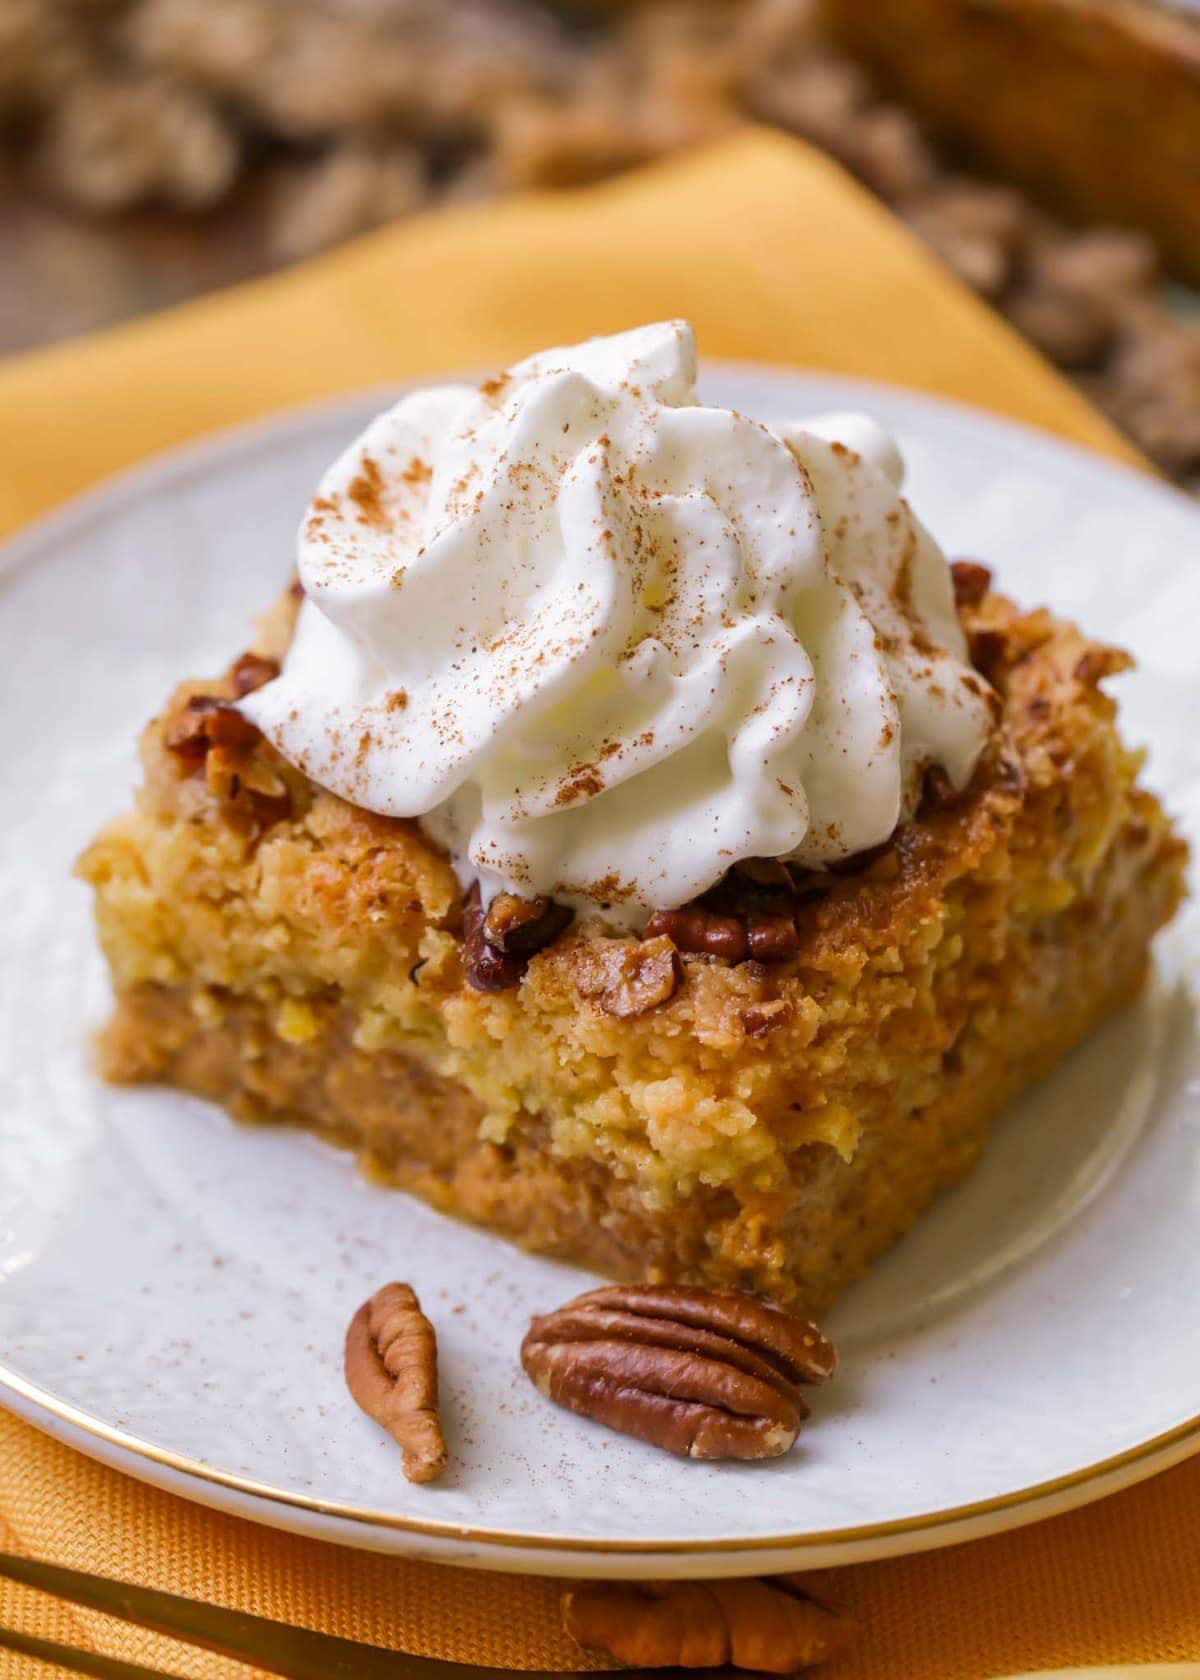 A delicious fall dessert, this Pumpkin Dump cake is simple, delicious and has all the fall flavors. Everyone loves this pumpkin recipe!